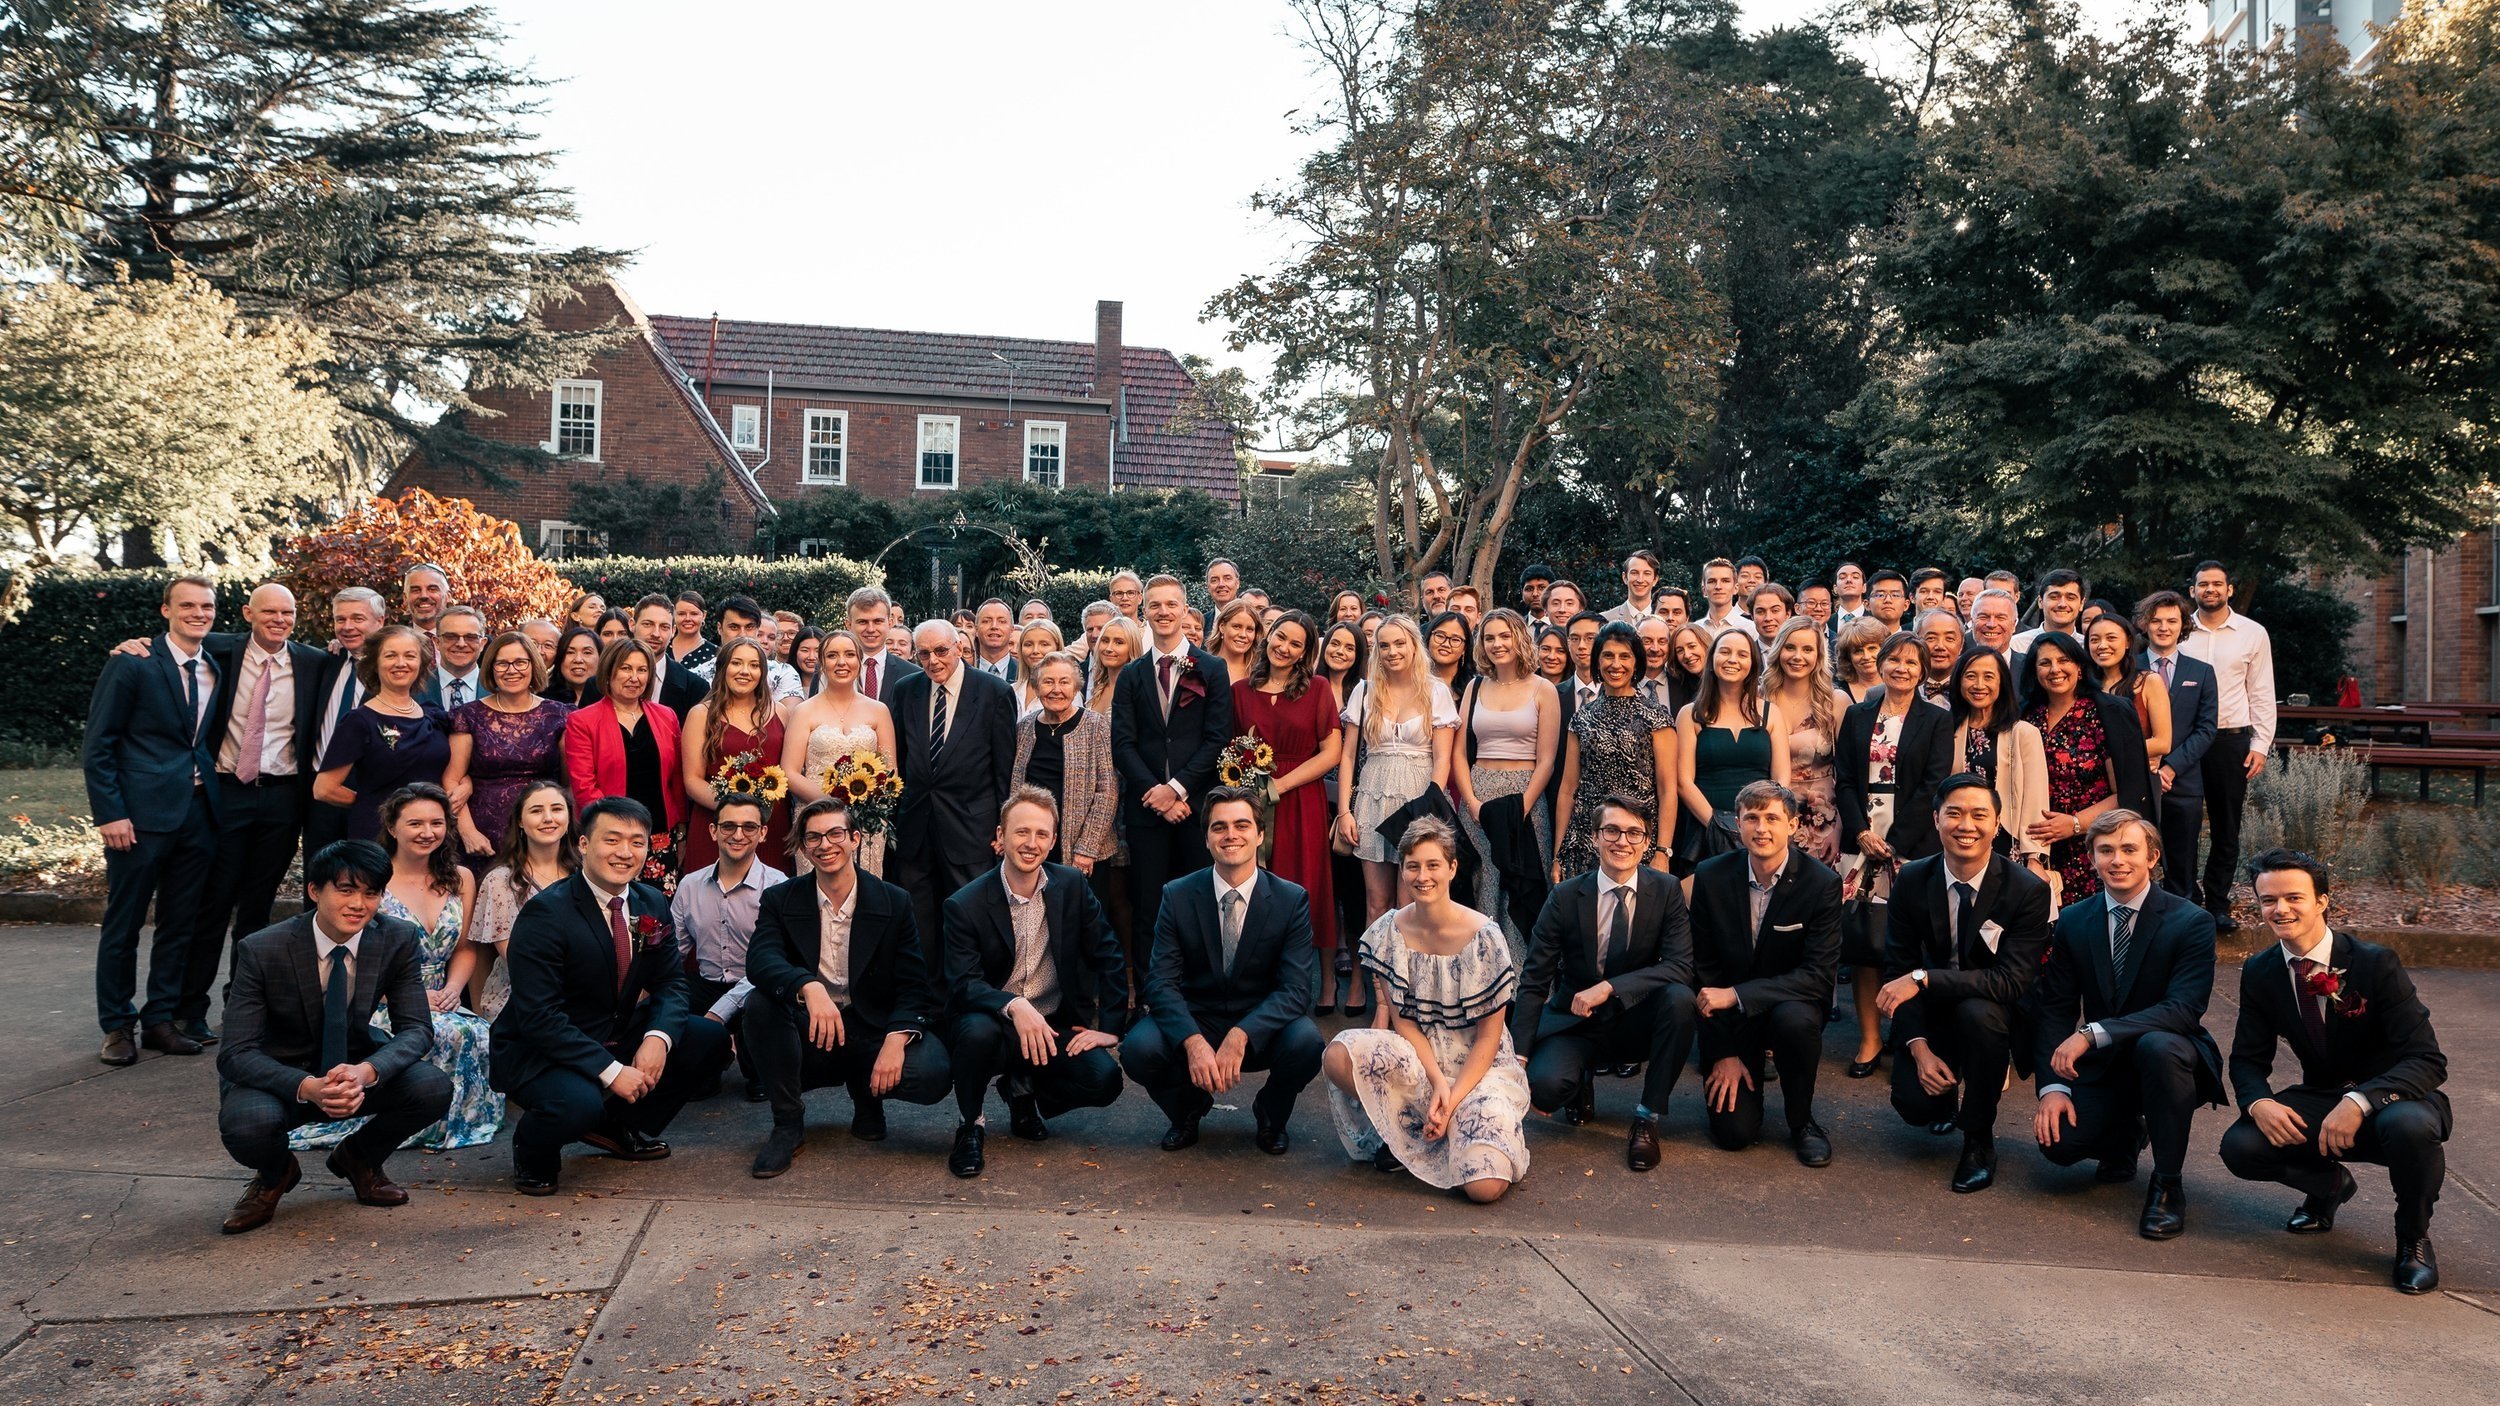 A group photo of wedding guests at a north sydney wedding taken by a sydney photographer